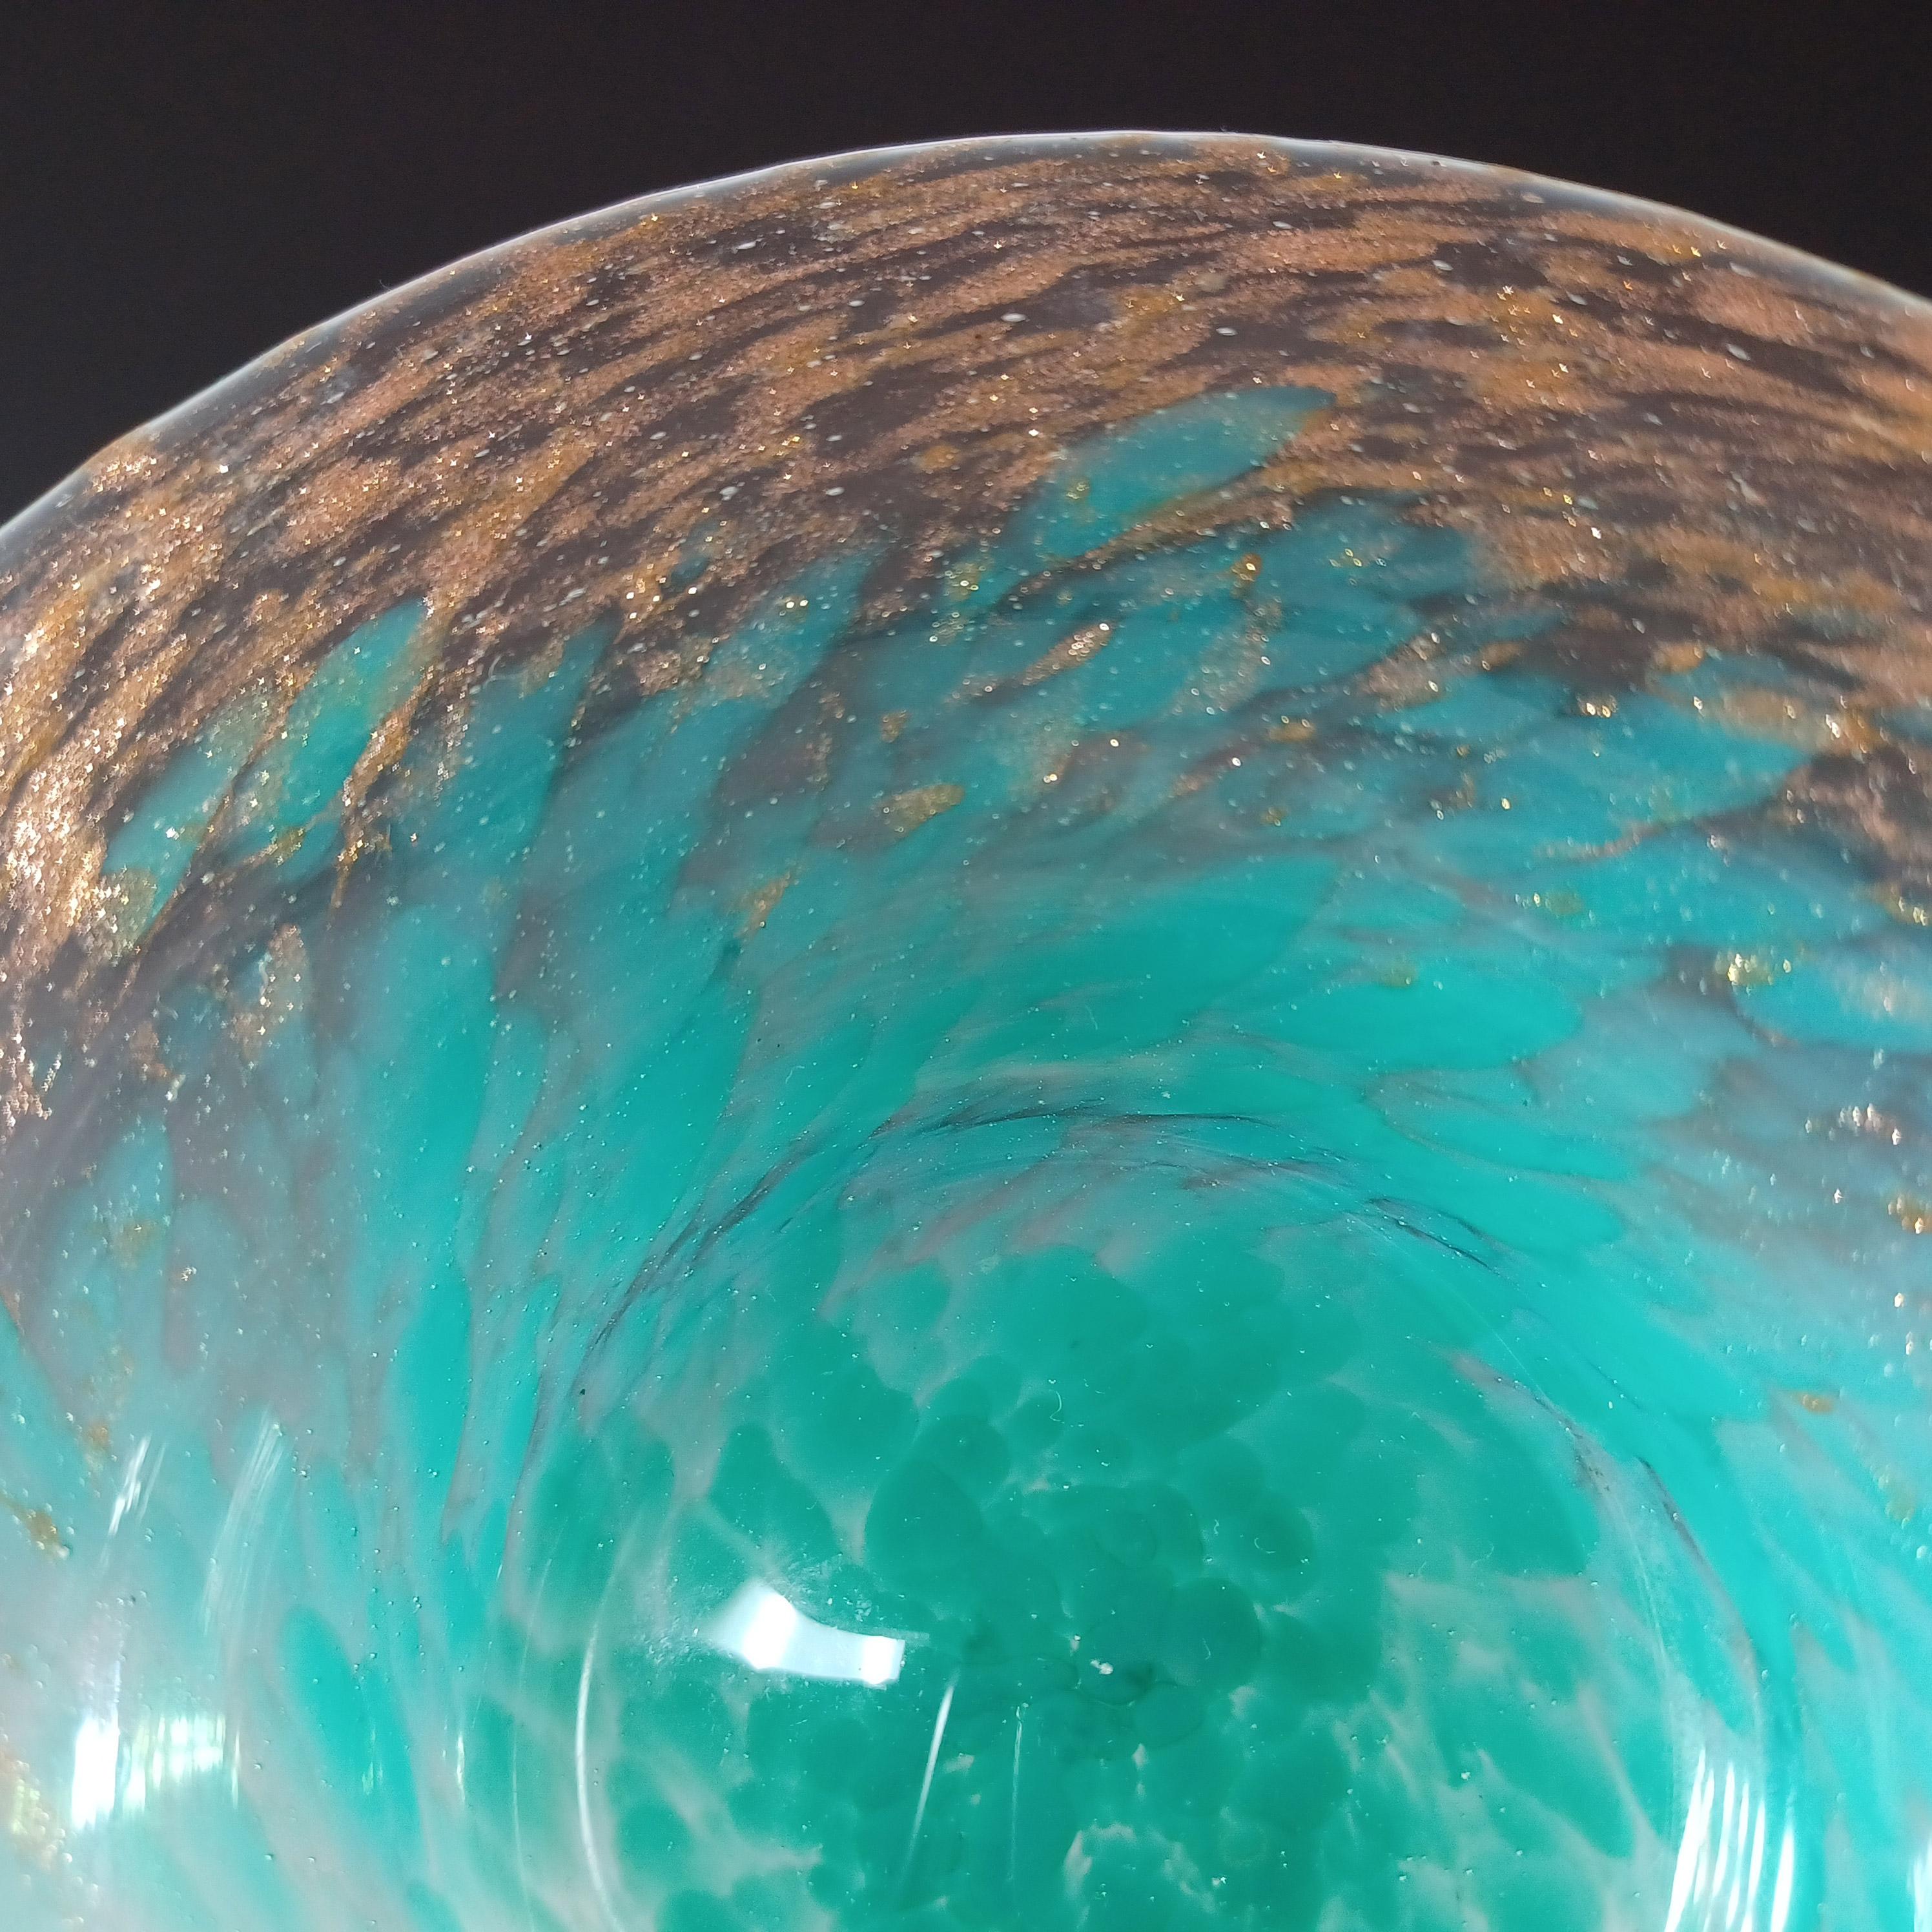 Monart UB.XI+ Green Copper Aventurine Vintage Glass Bowl In Good Condition For Sale In Bolton, GB